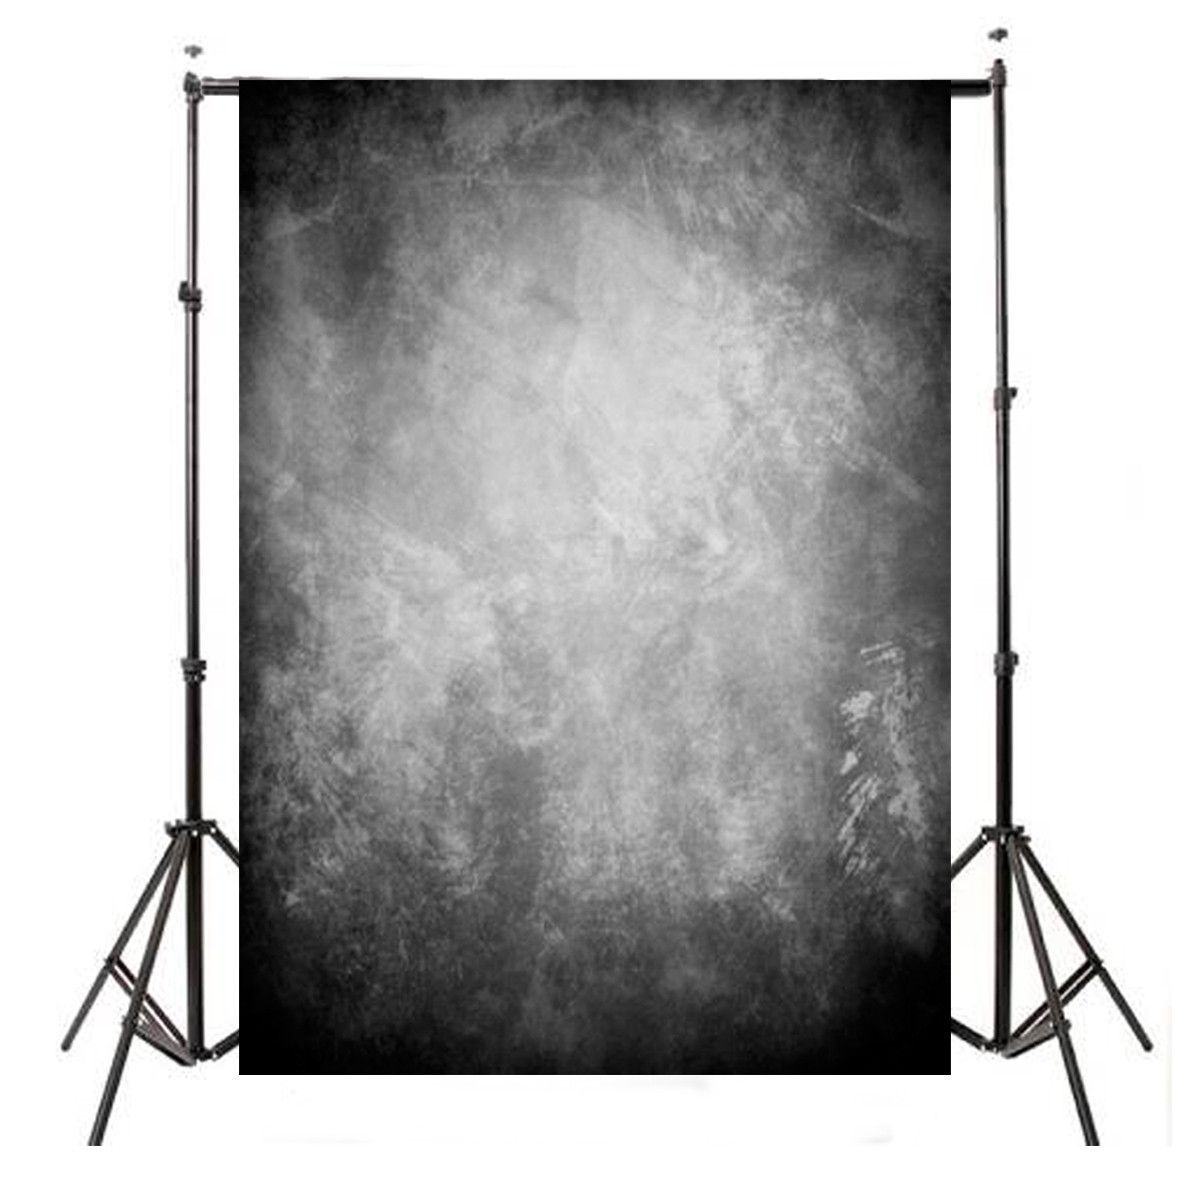 5x7FT-Bright-black-Vintage-Wall-Photography-Backdrop-Studio-Prop-Background-1391373